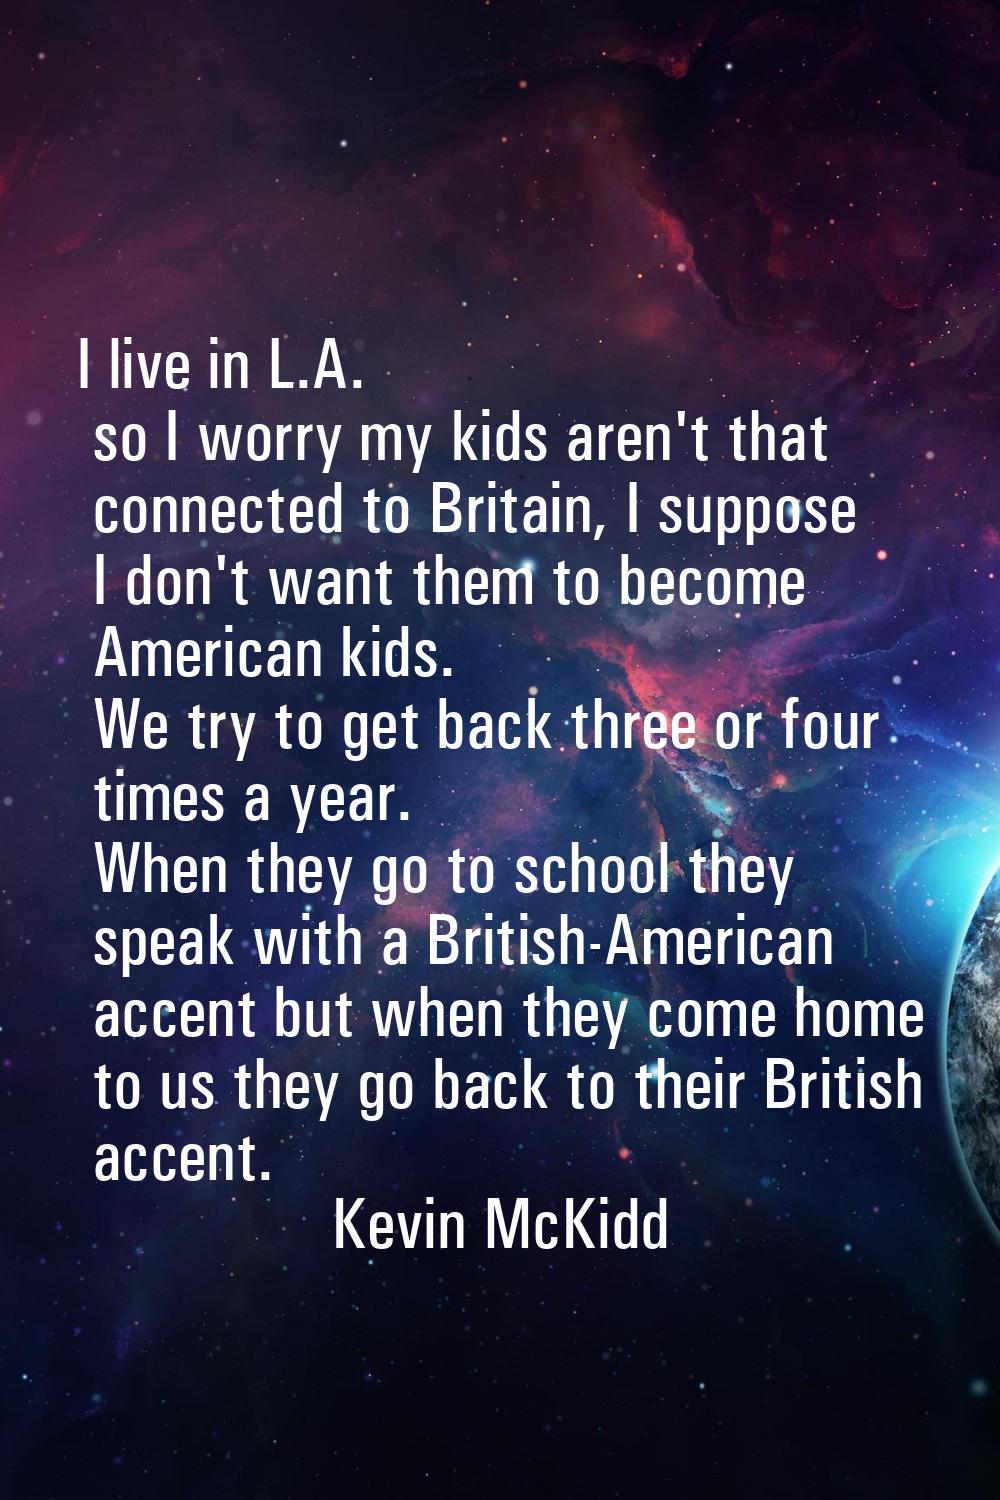 I live in L.A. so I worry my kids aren't that connected to Britain, I suppose I don't want them to 